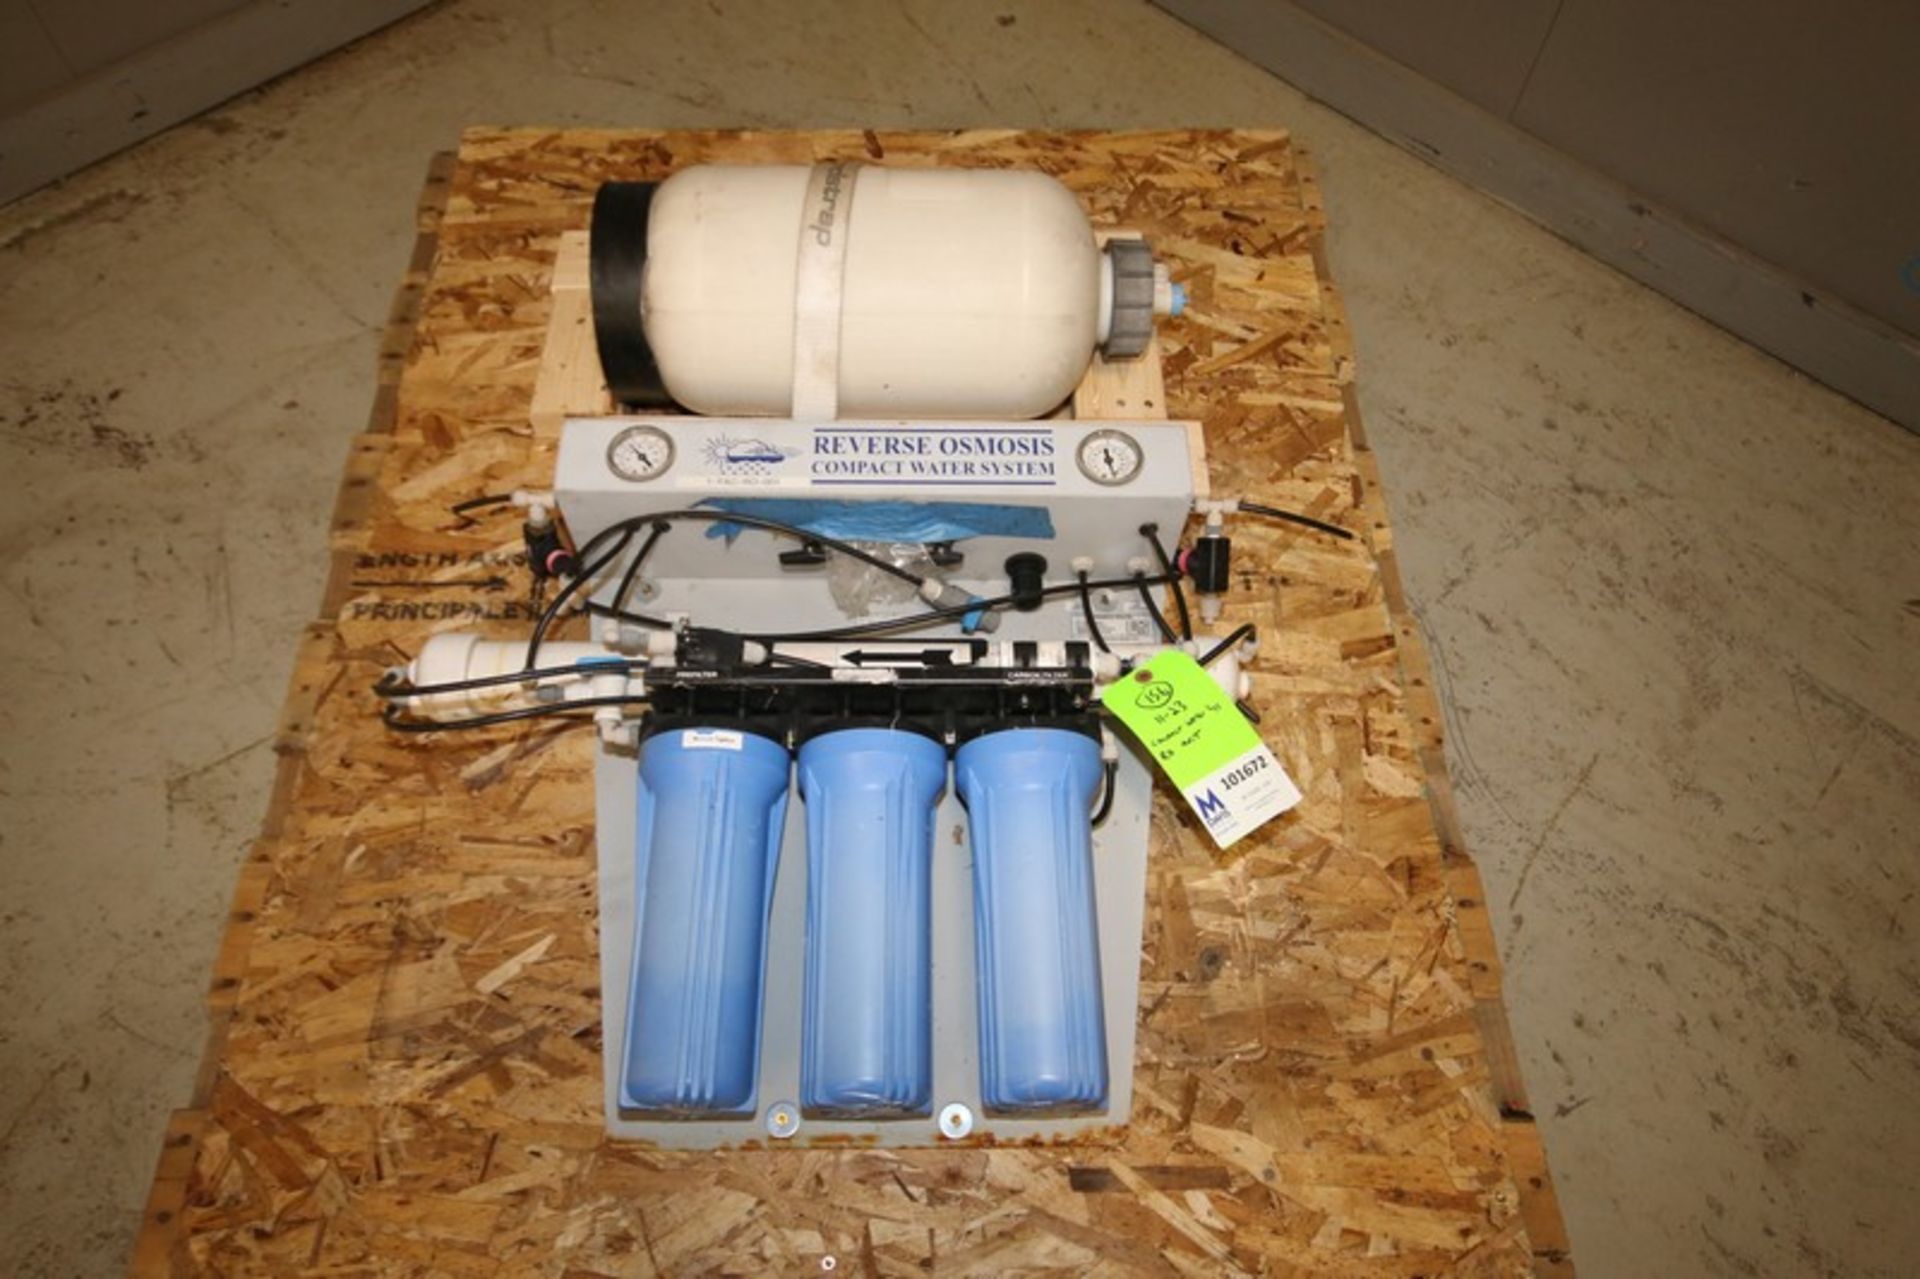 Compact Water System Wall Mounted RO System, Model LP-80, SN 02023-80, with (3) Filters & Holding